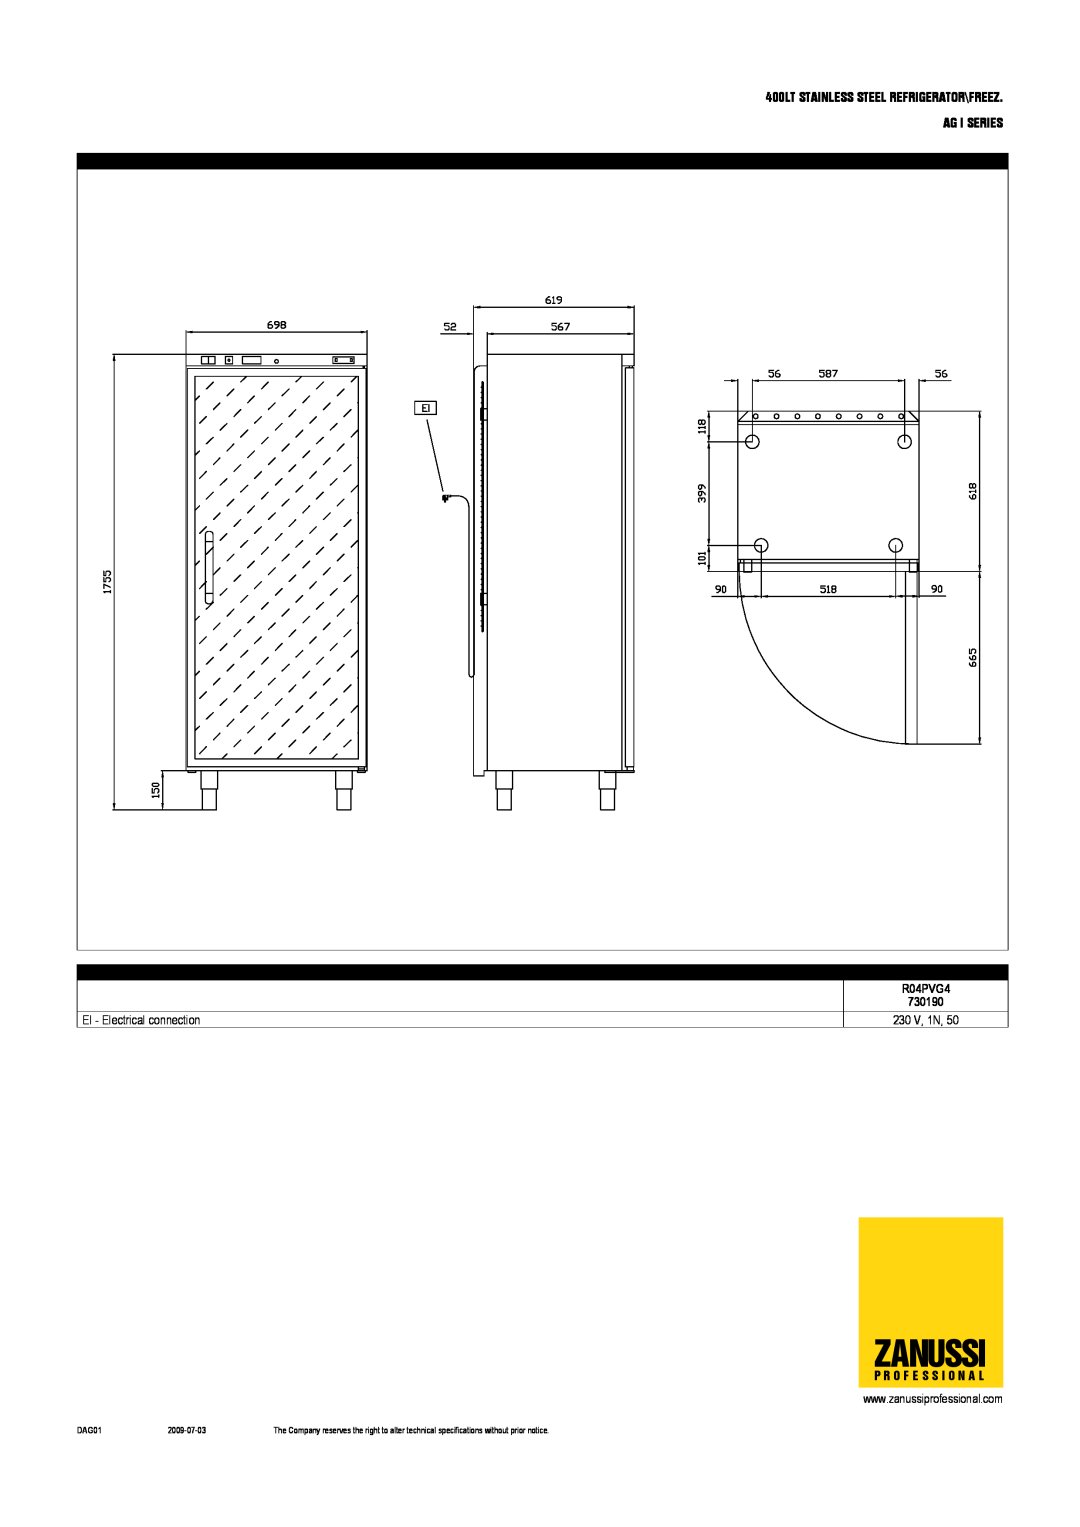 Zanussi R04PVF4, 730189 Zanussi, 730190, EI - Electrical connection, 400LT STAINLESS STEEL REFRIGERATOR\FREEZ, Ag I Series 